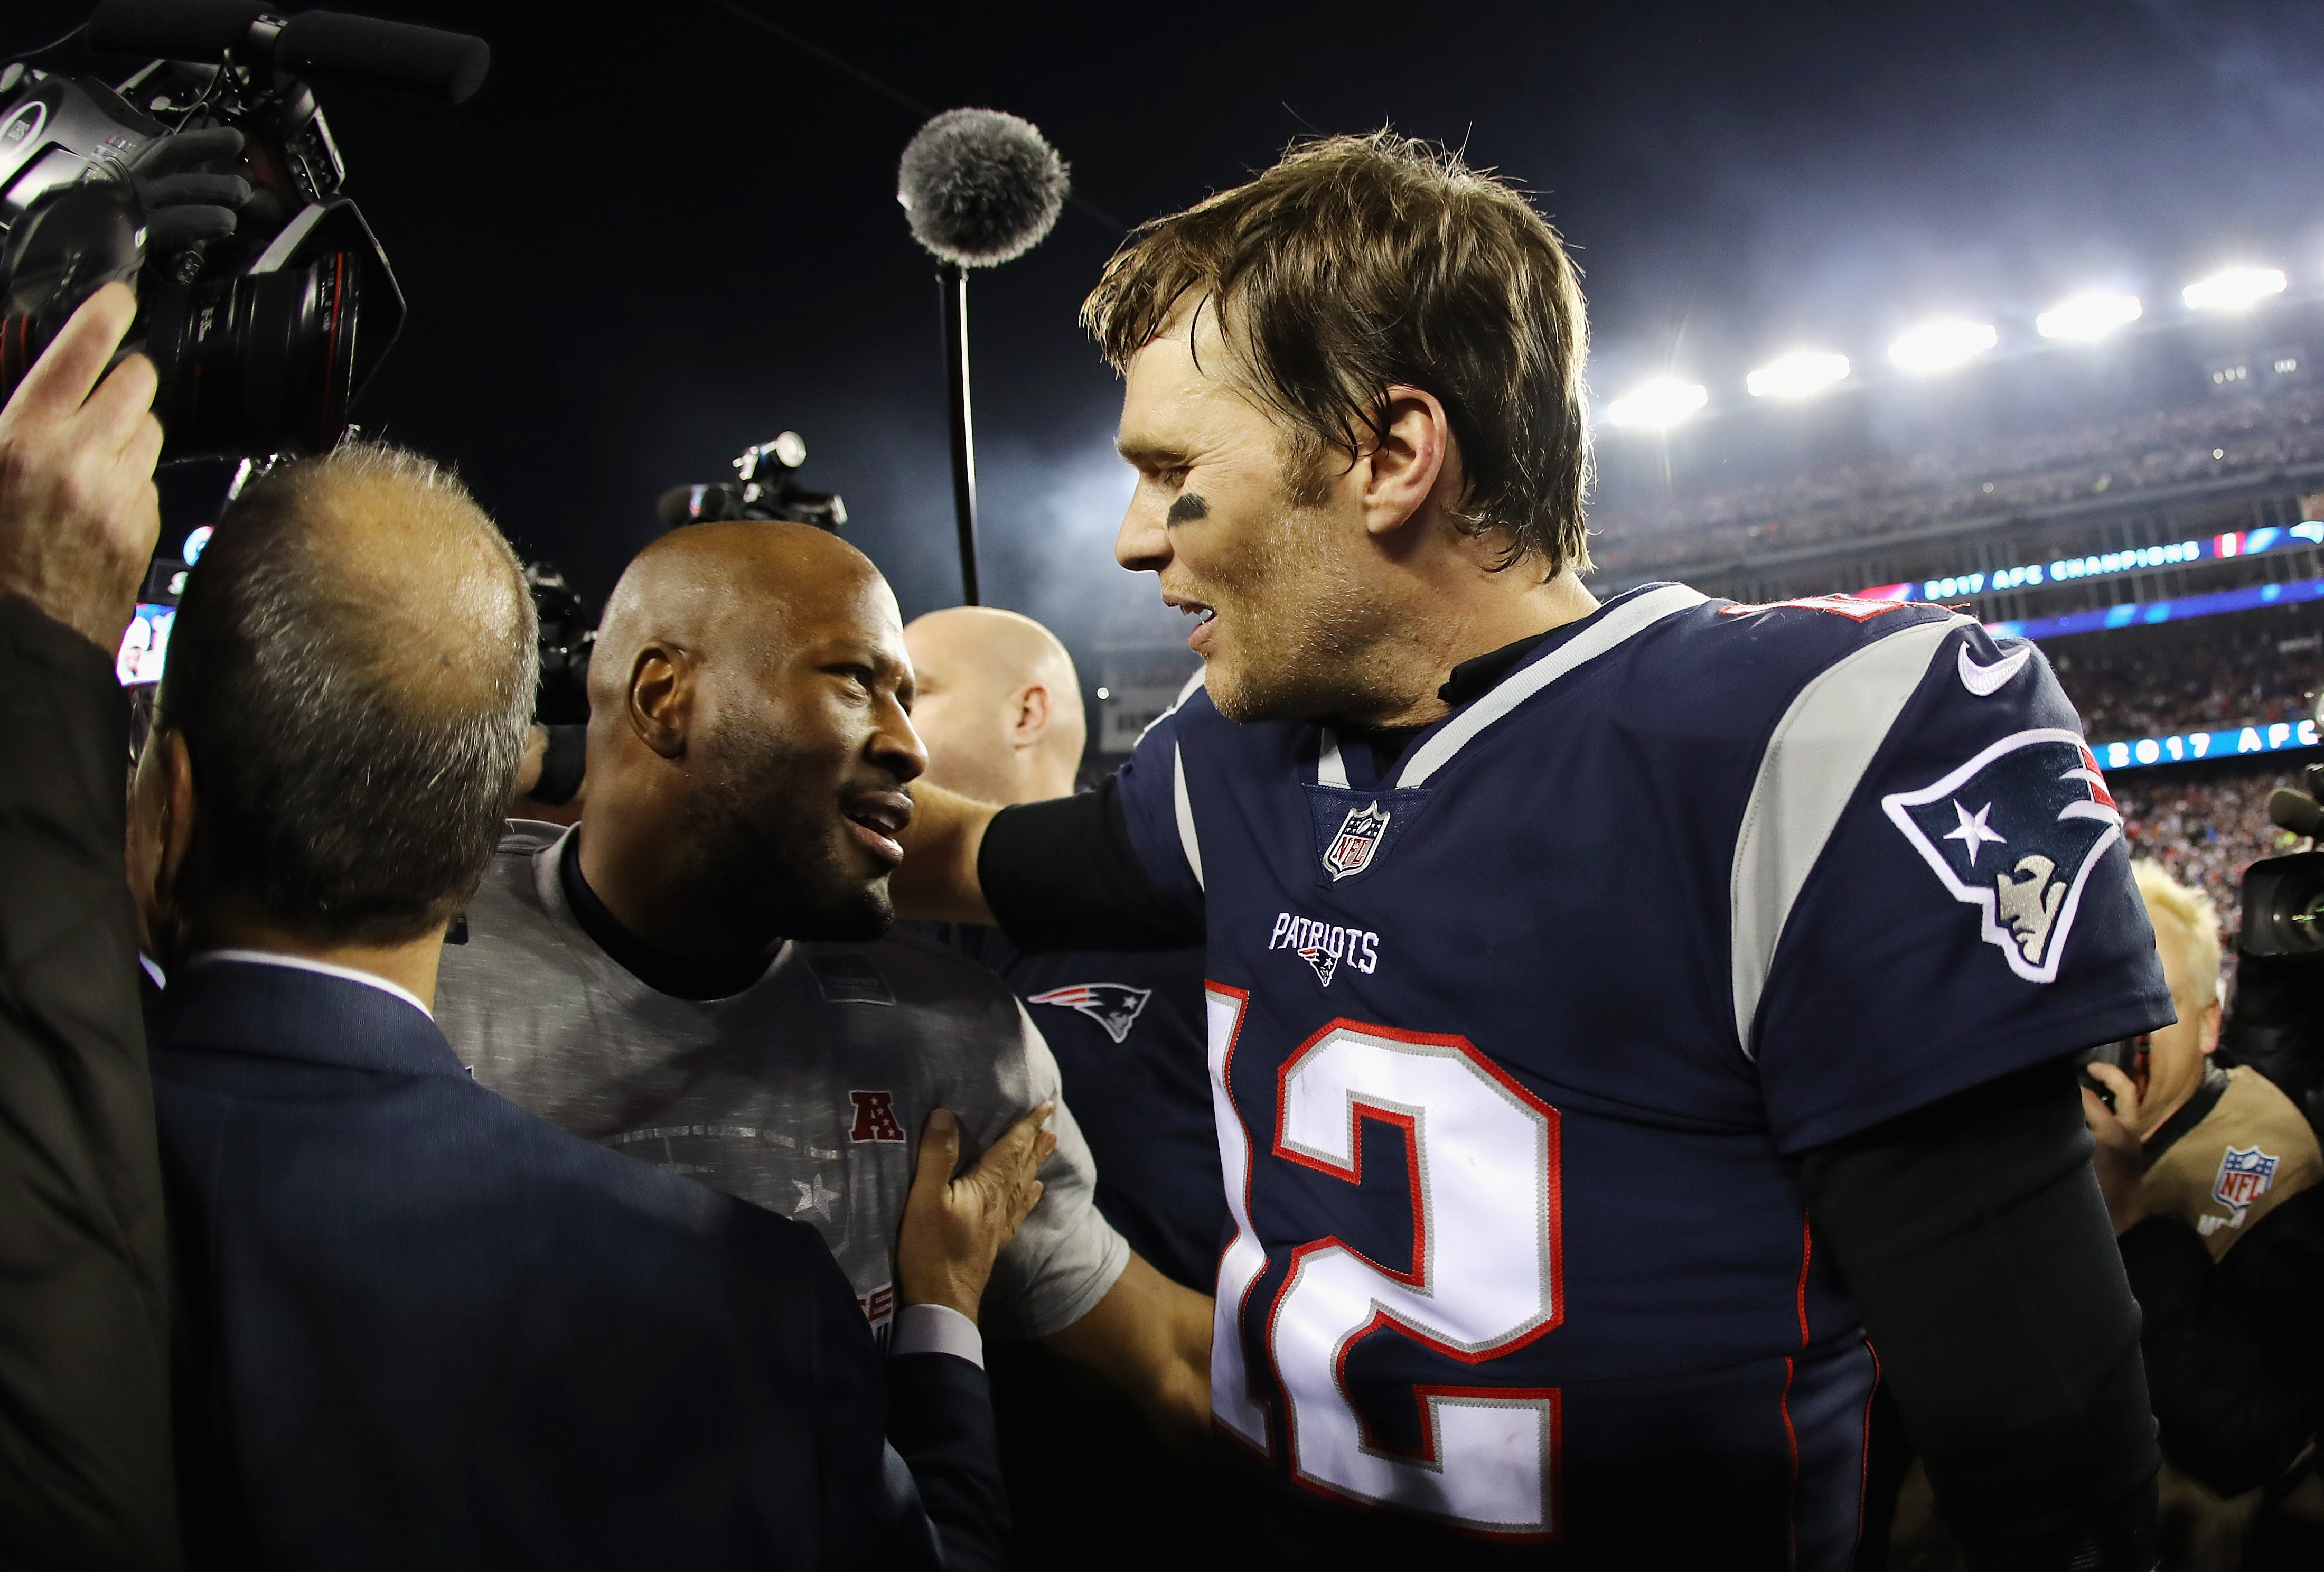 Former Steelers LB James Harrison and Tom Brady celebrate Patriots victory